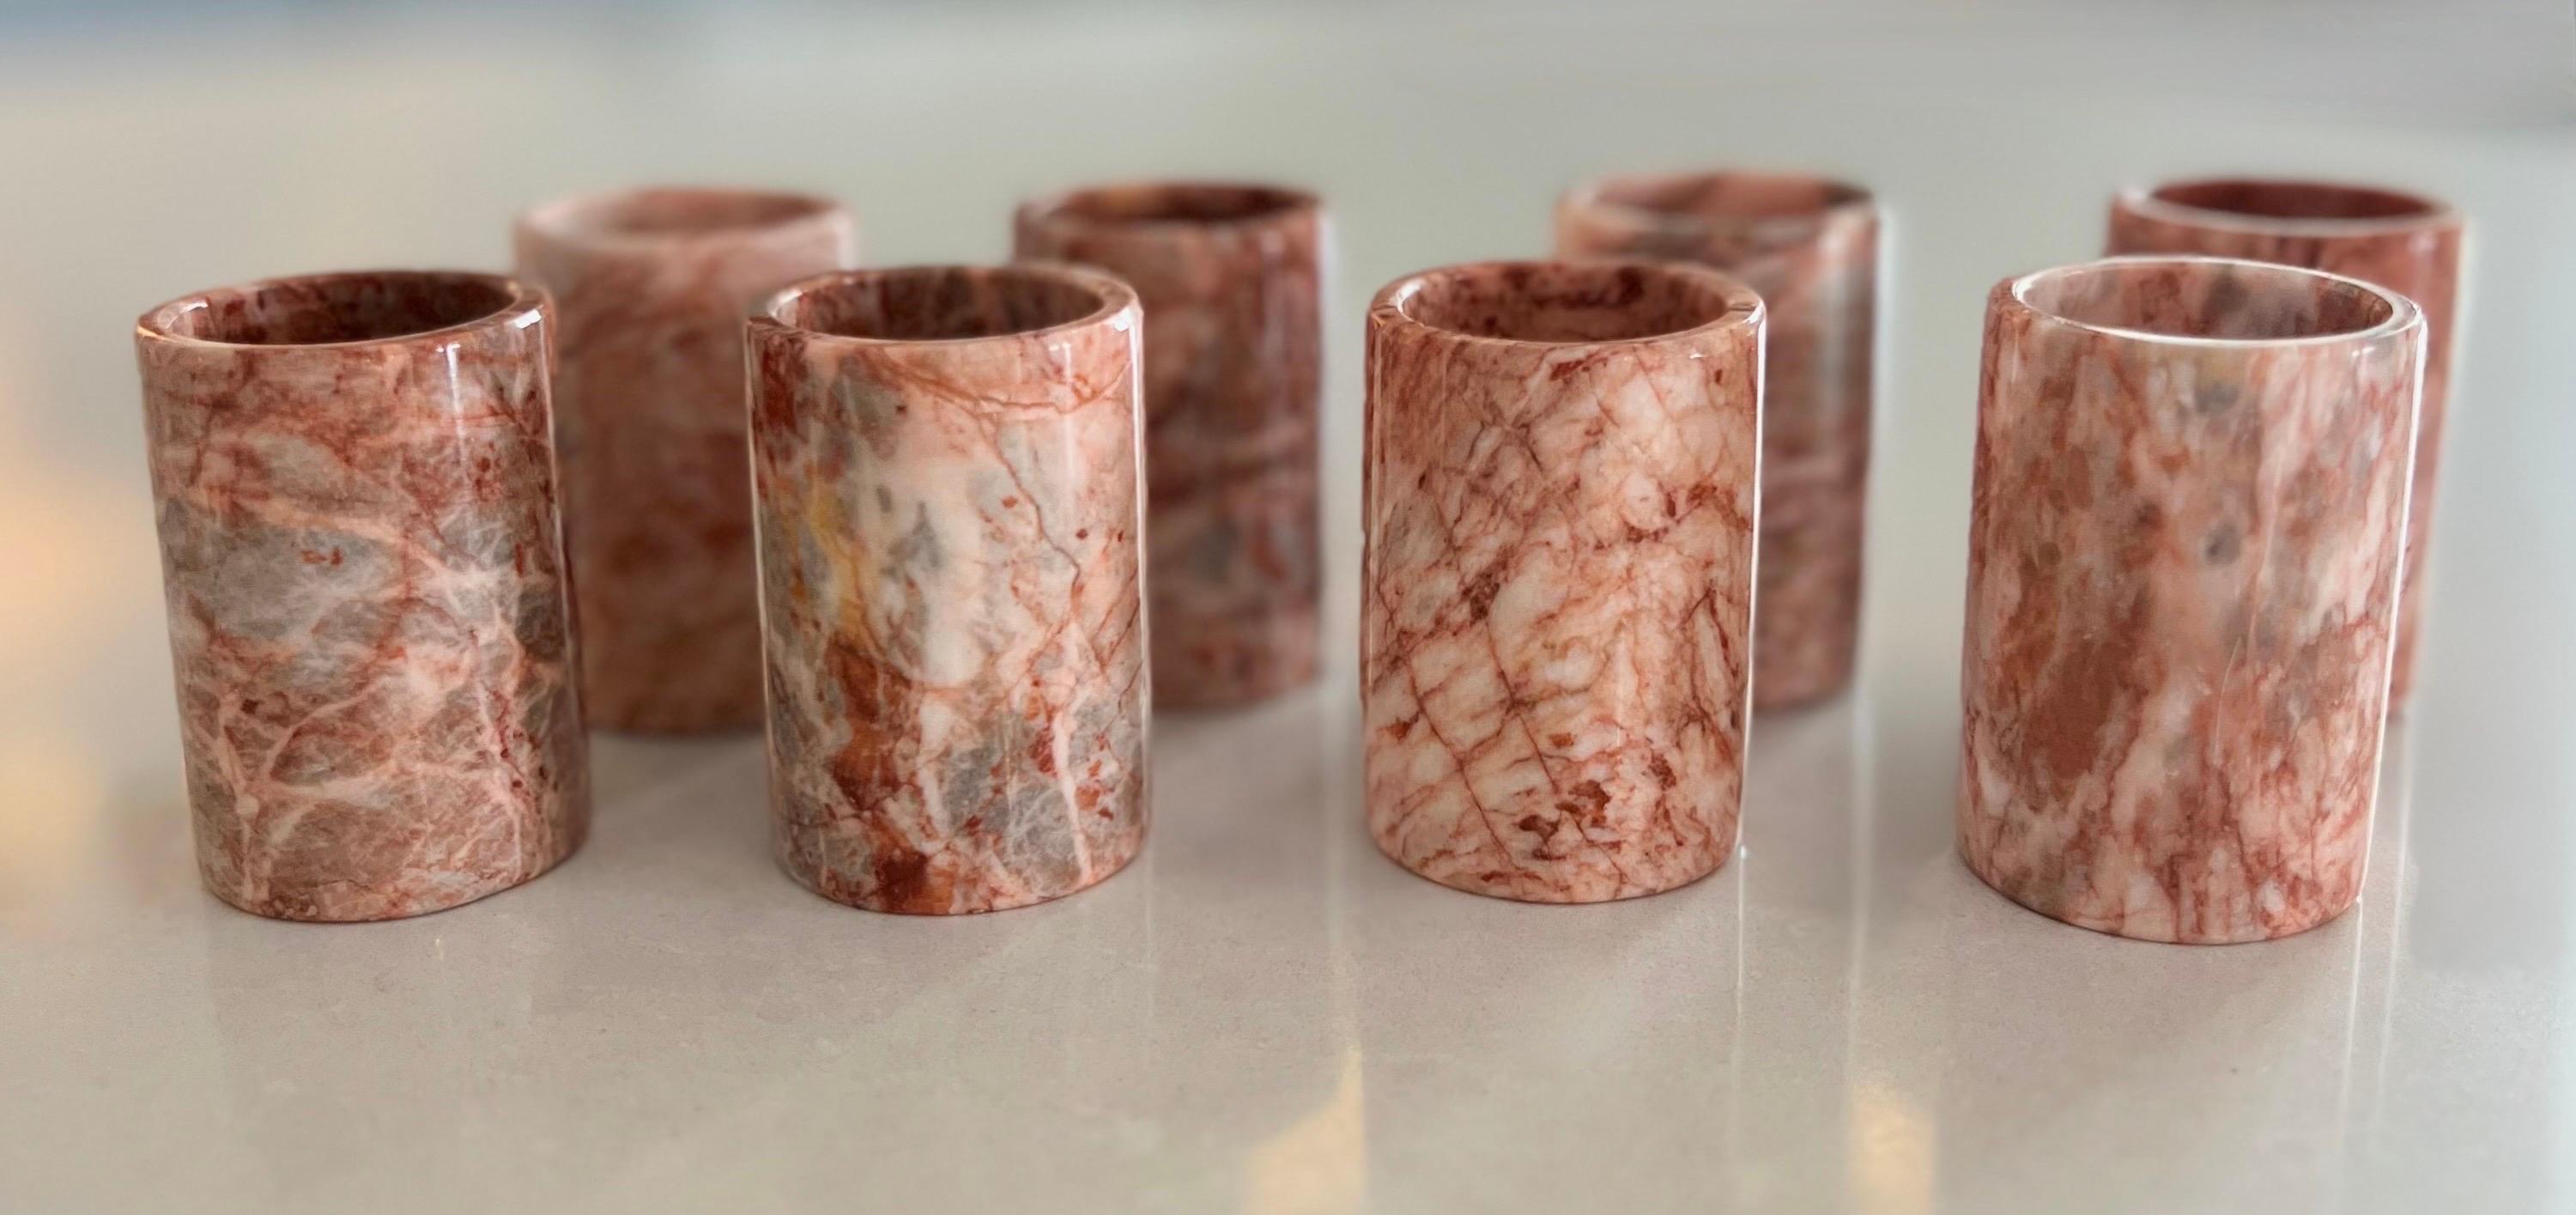 Up your bar cart game with this set of eight handmade pink marble shot glasses.  Each glass features beautiful shades of pink with coral and grey veining.  Each glass measures 2.5-inch height by 1.5-inch diameter.

These are natural stone glasses